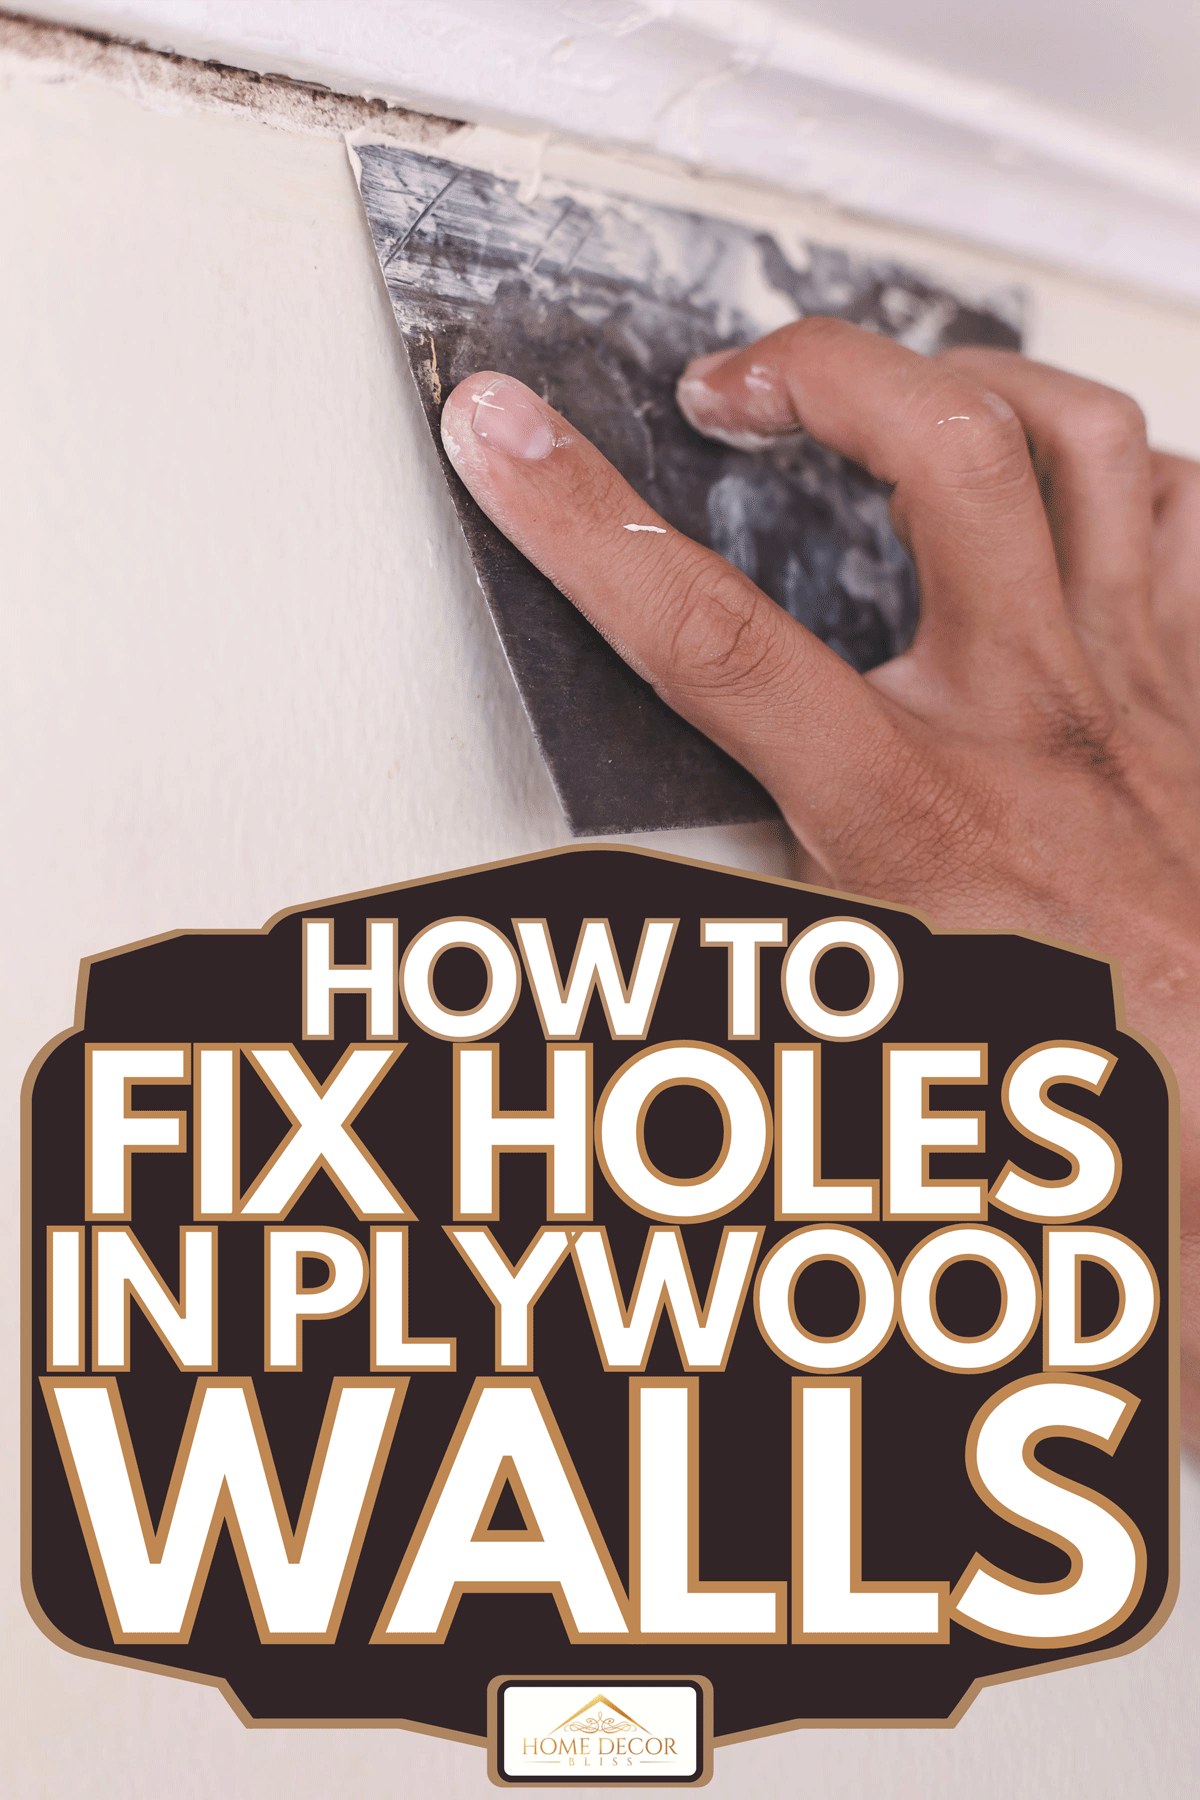 Handyman applies putty or filler to cover the gap between a wood cornice and a concrete wall with a trowel, How To Fix Holes In Plywood Walls